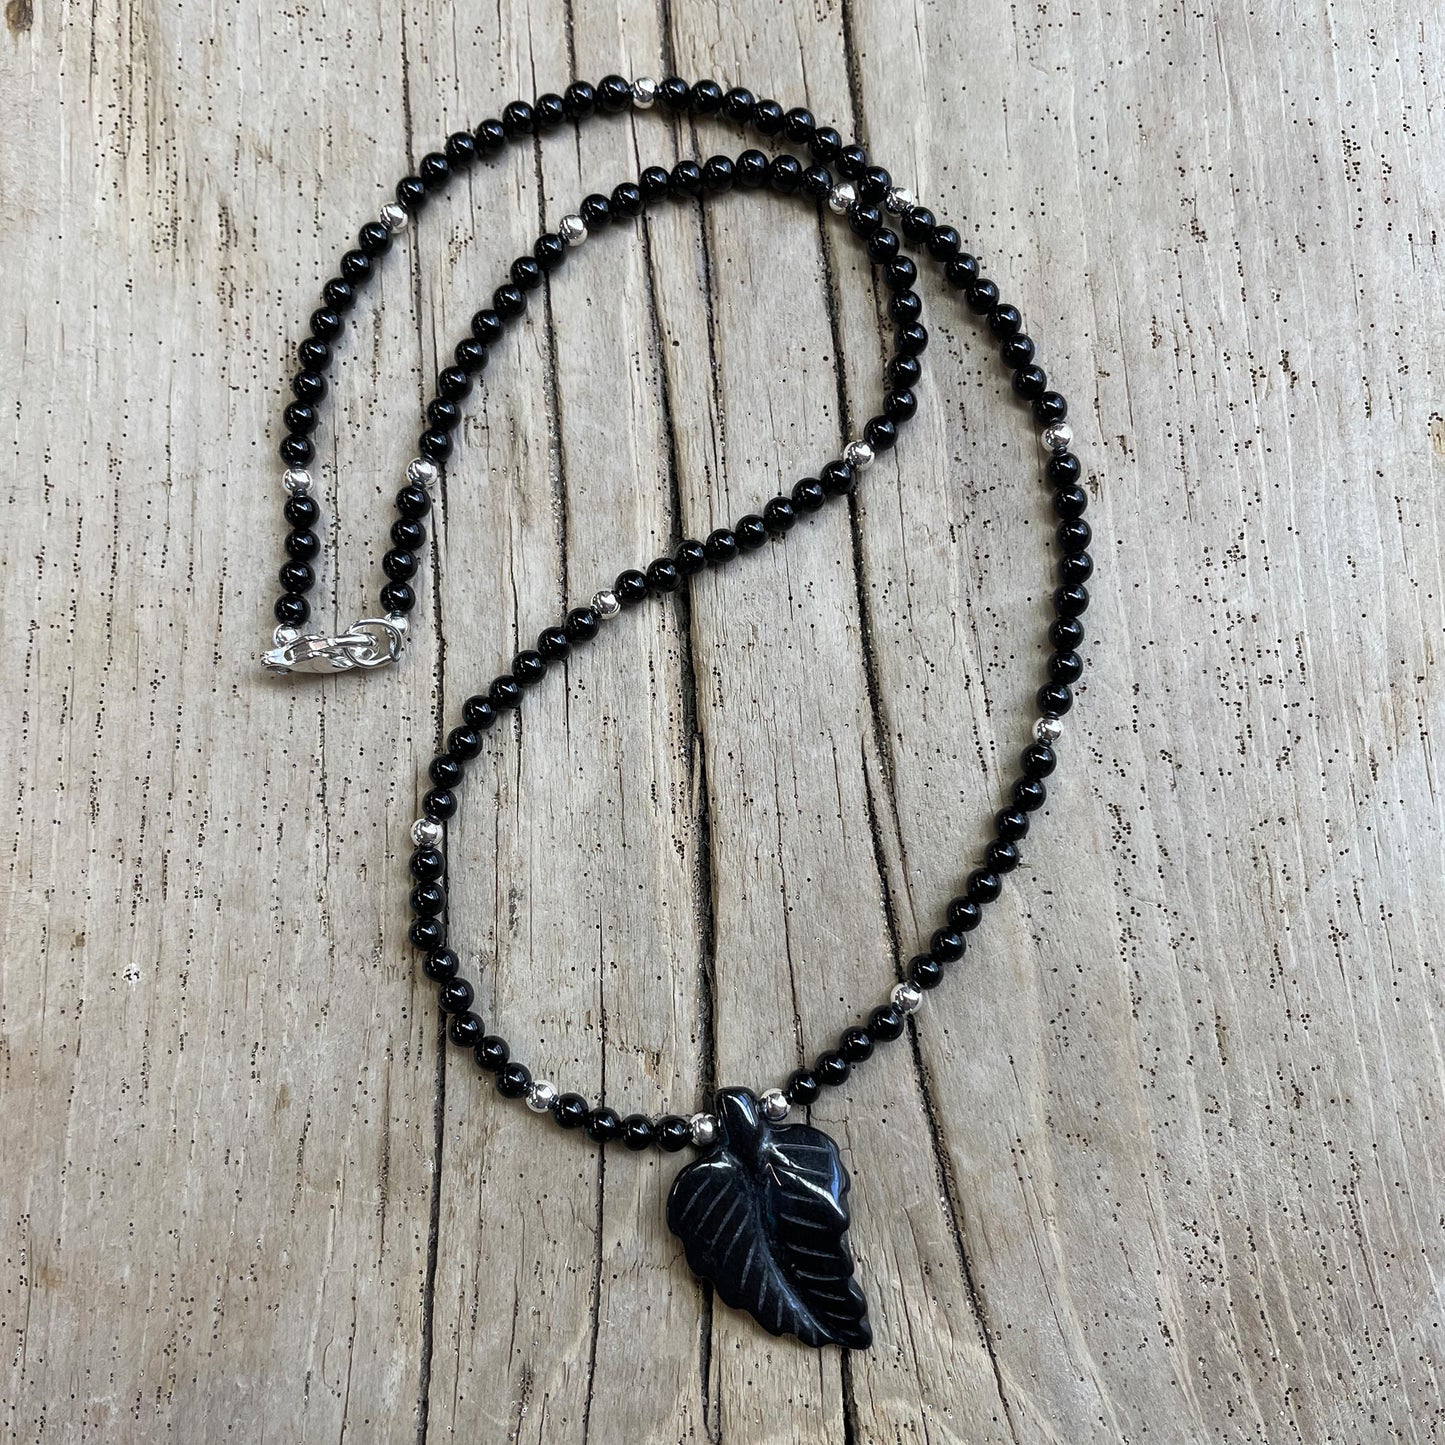 Black Onyx Necklace with Hand Carved Onyx Leaf